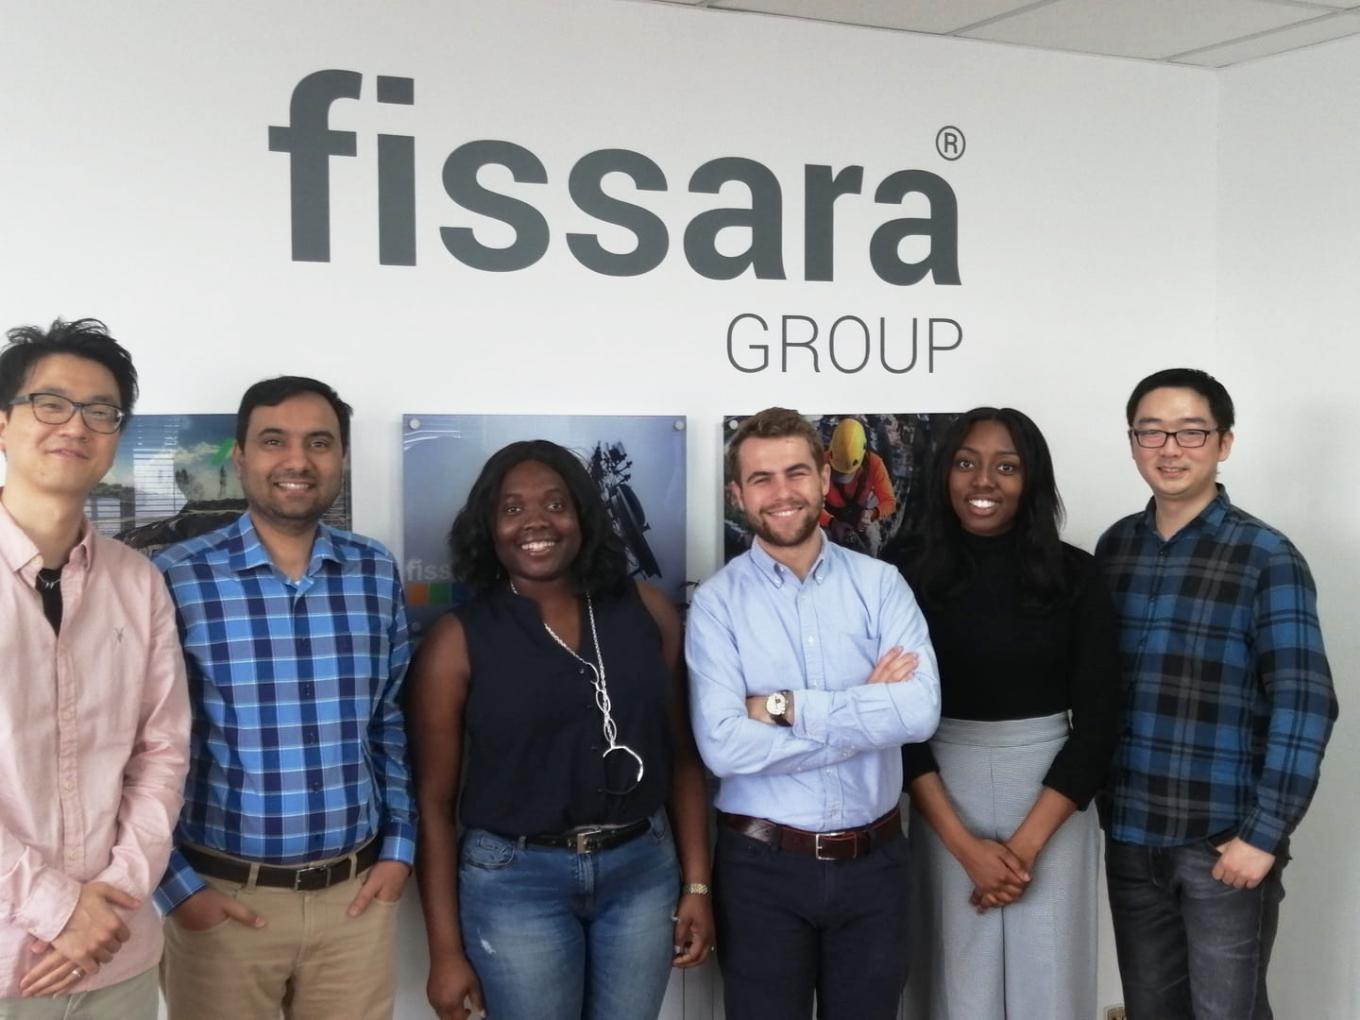 A group of employees smiling and stood in front of a Fissara Group branded wall